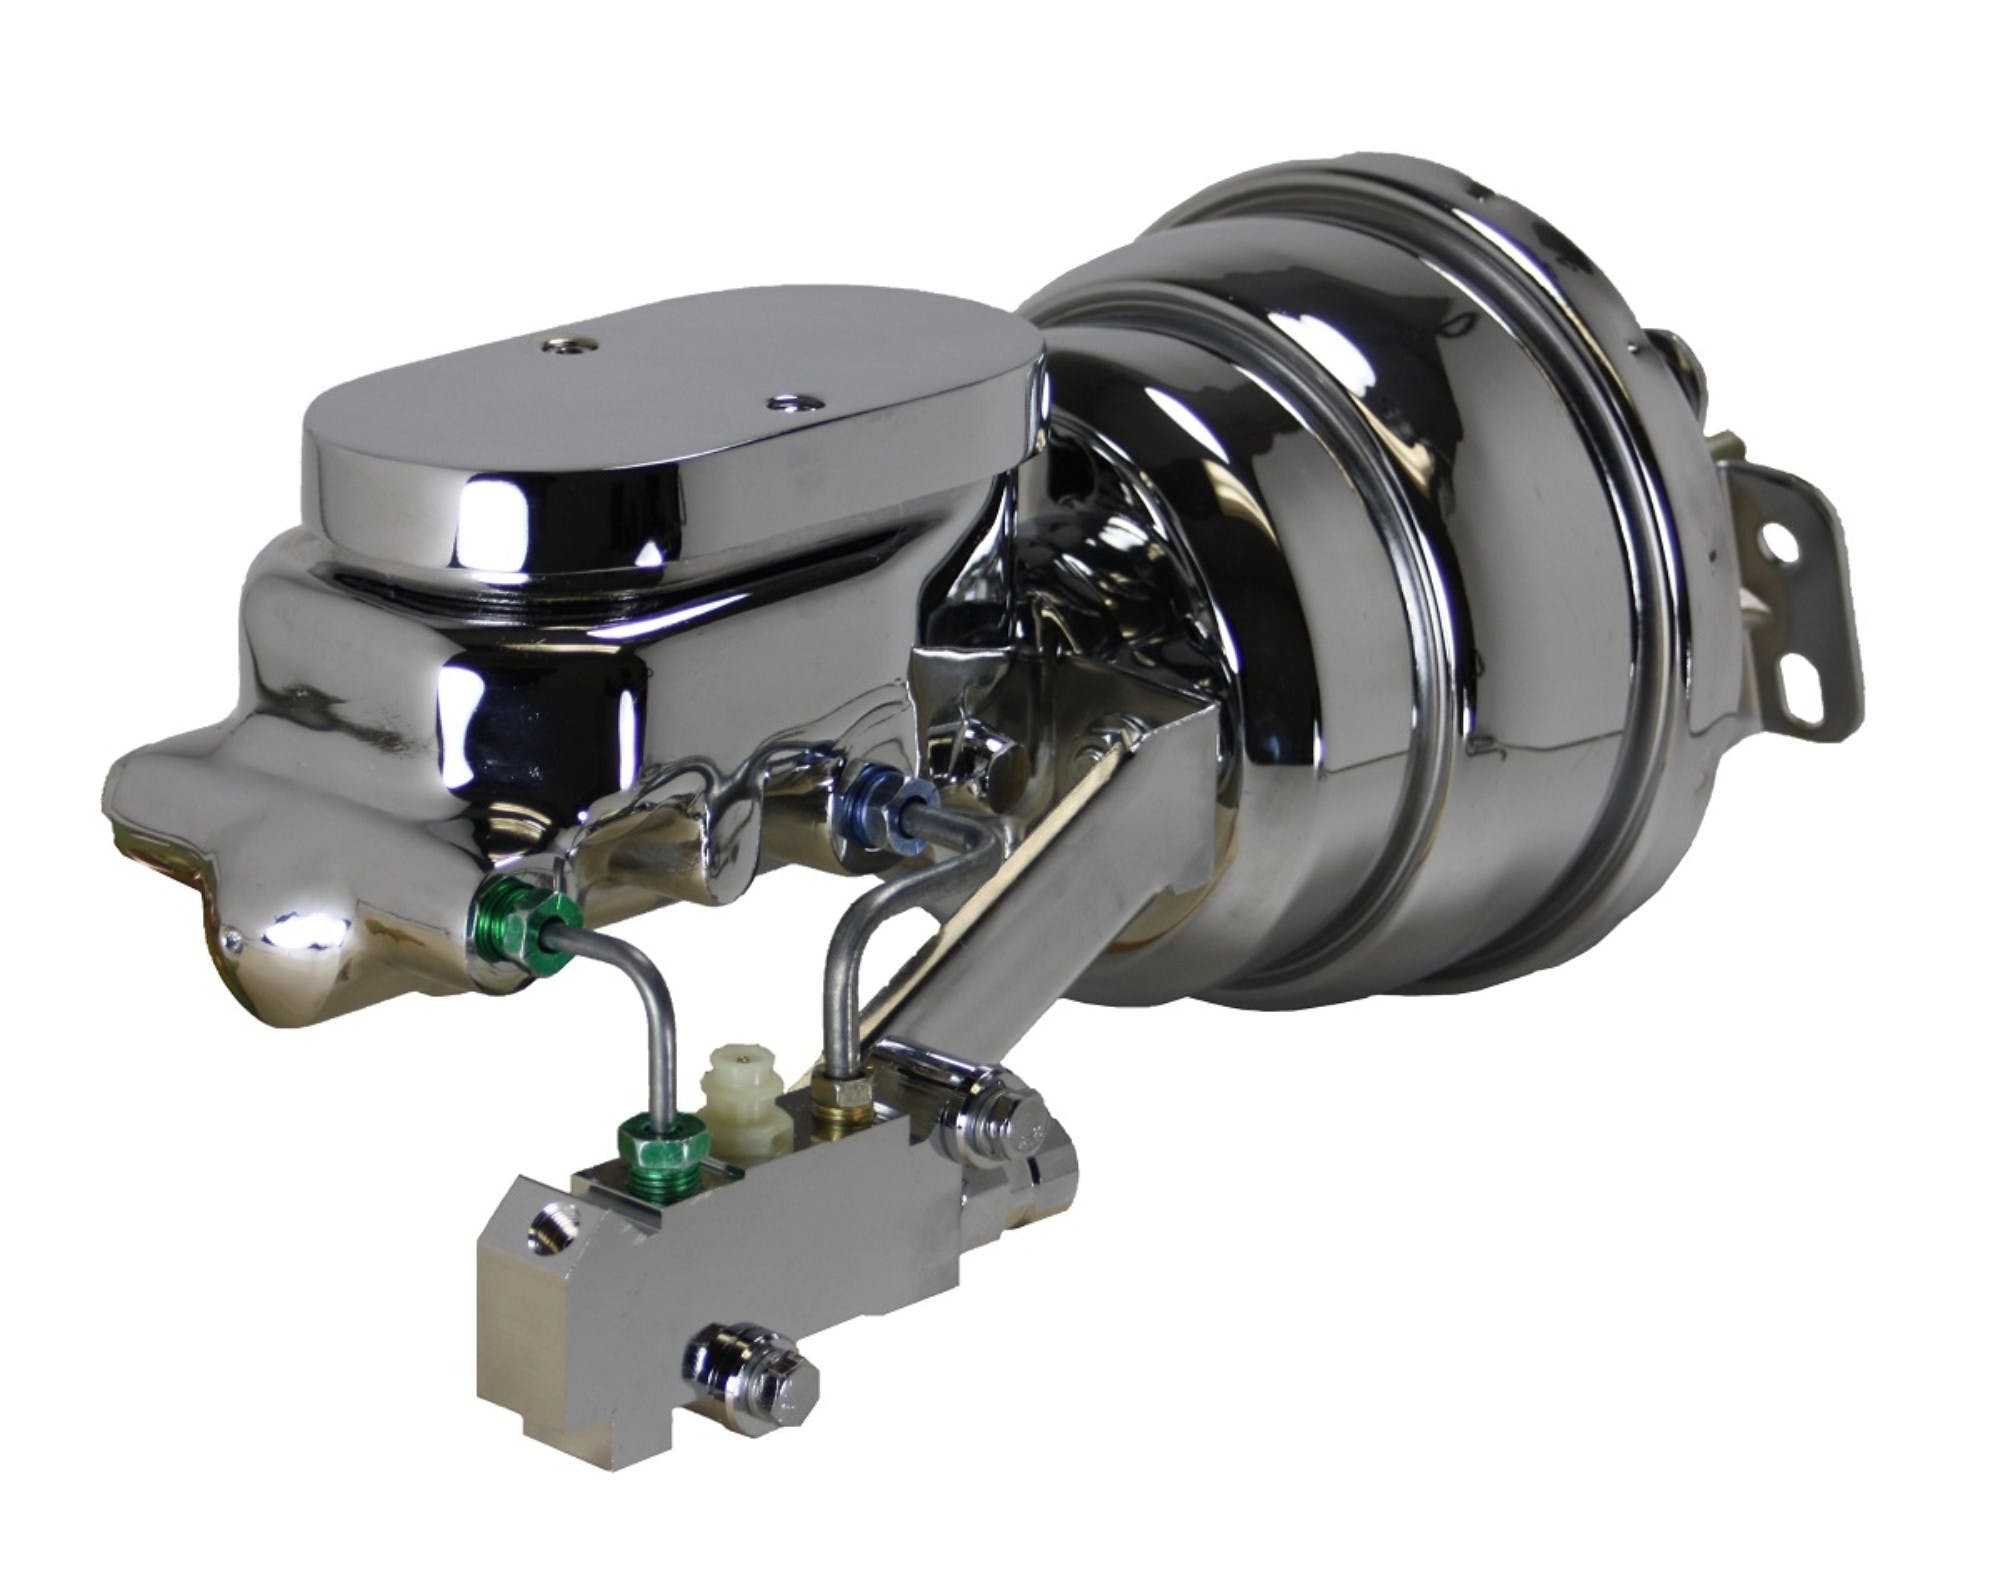 LEED Brakes 2L6B4 7 in Dual Power Booster ,1-1/8in Bore, side valve disc/disc (Chrome)